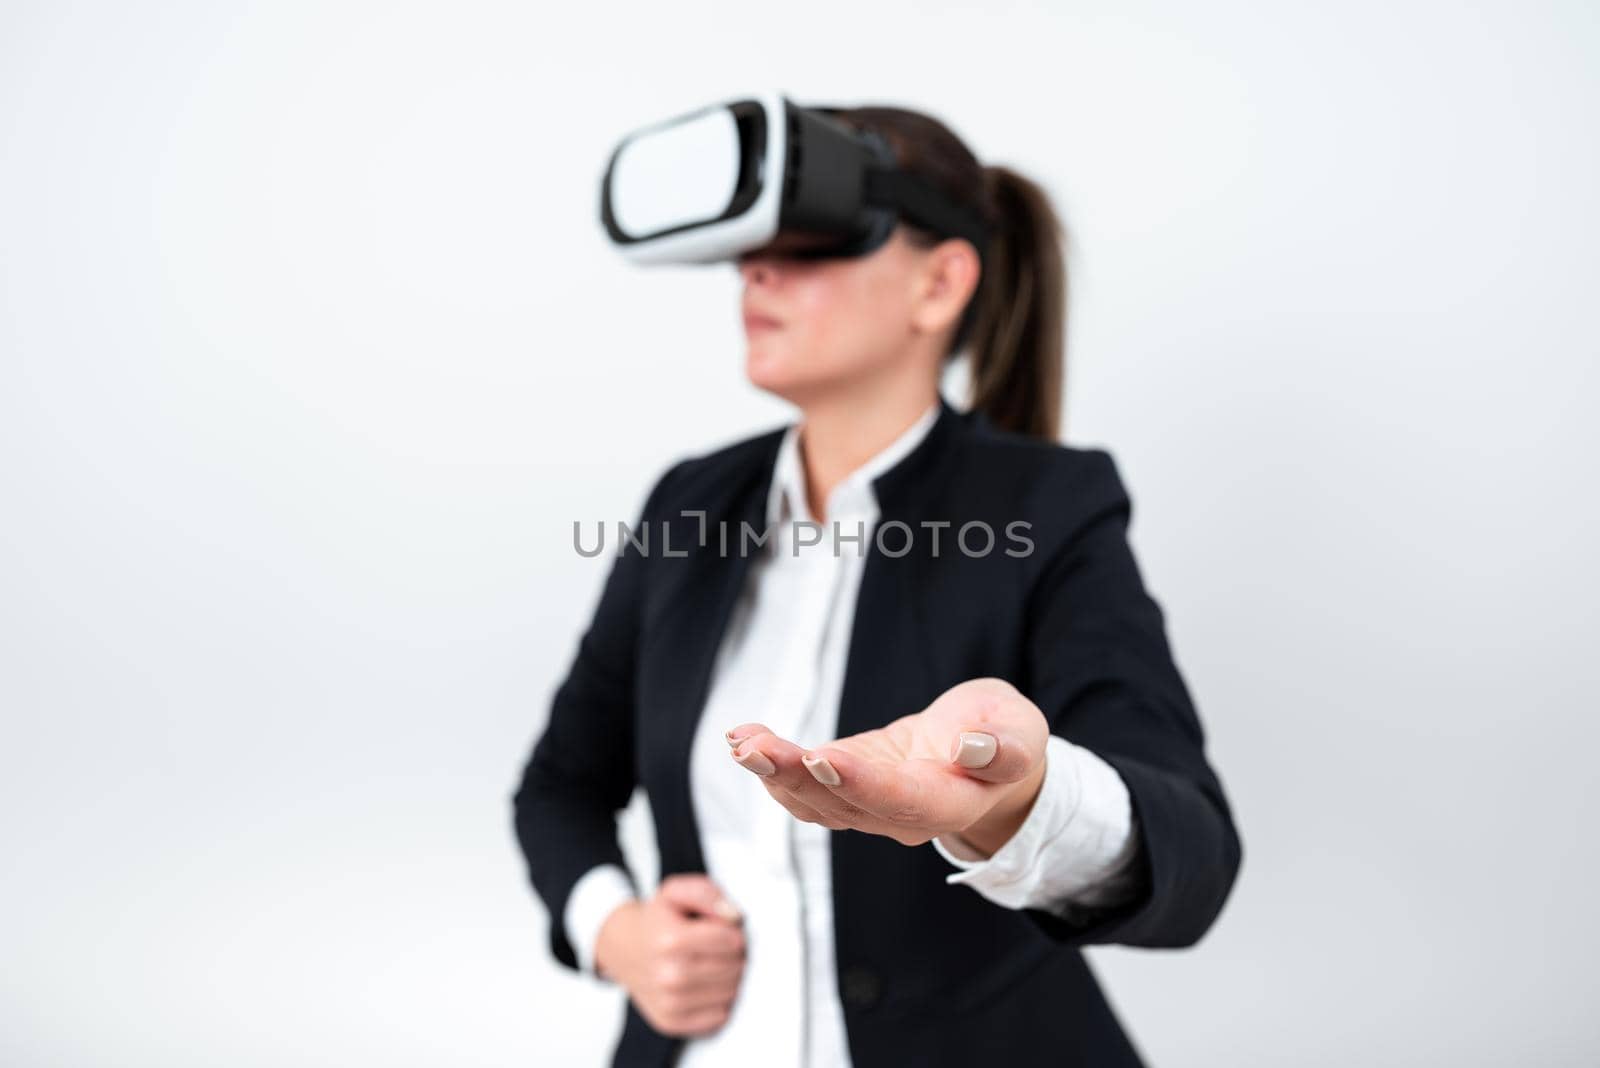 Woman Wearing Vr Glasses And Presenting Important Messages Over One Hand.